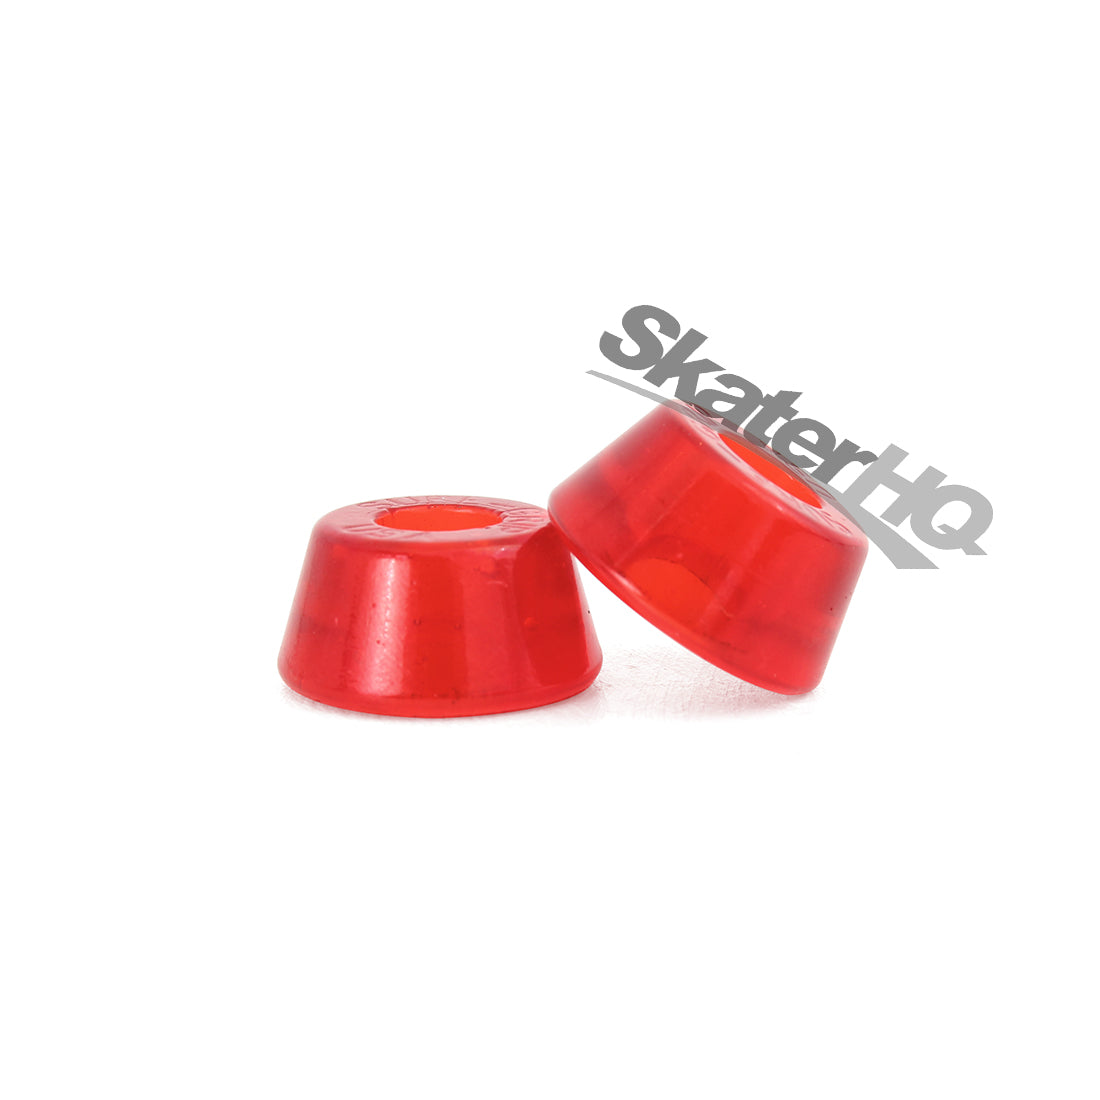 Sure-Grip Conical Cushions 93a 4pk - Red Roller Skate Hardware and Parts